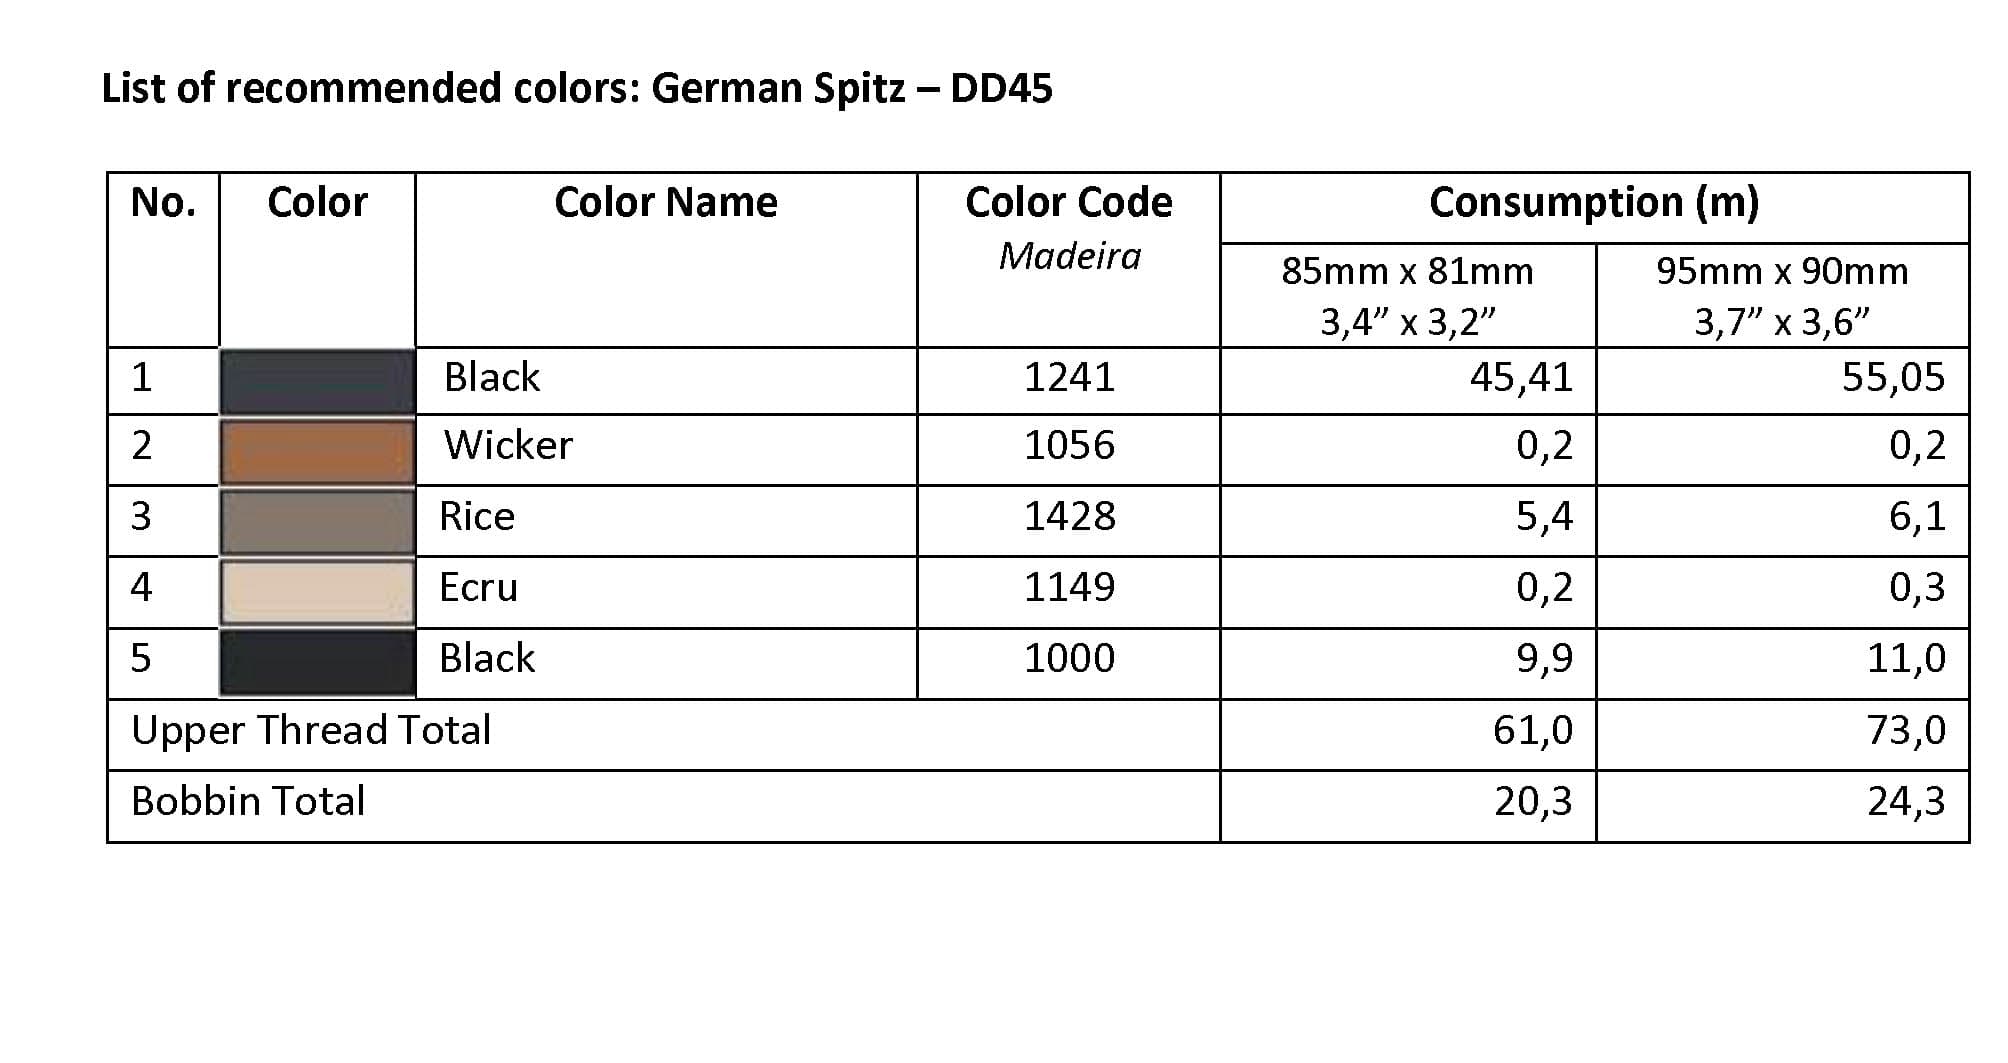 List of Recommended Colors - German Spitz DD45